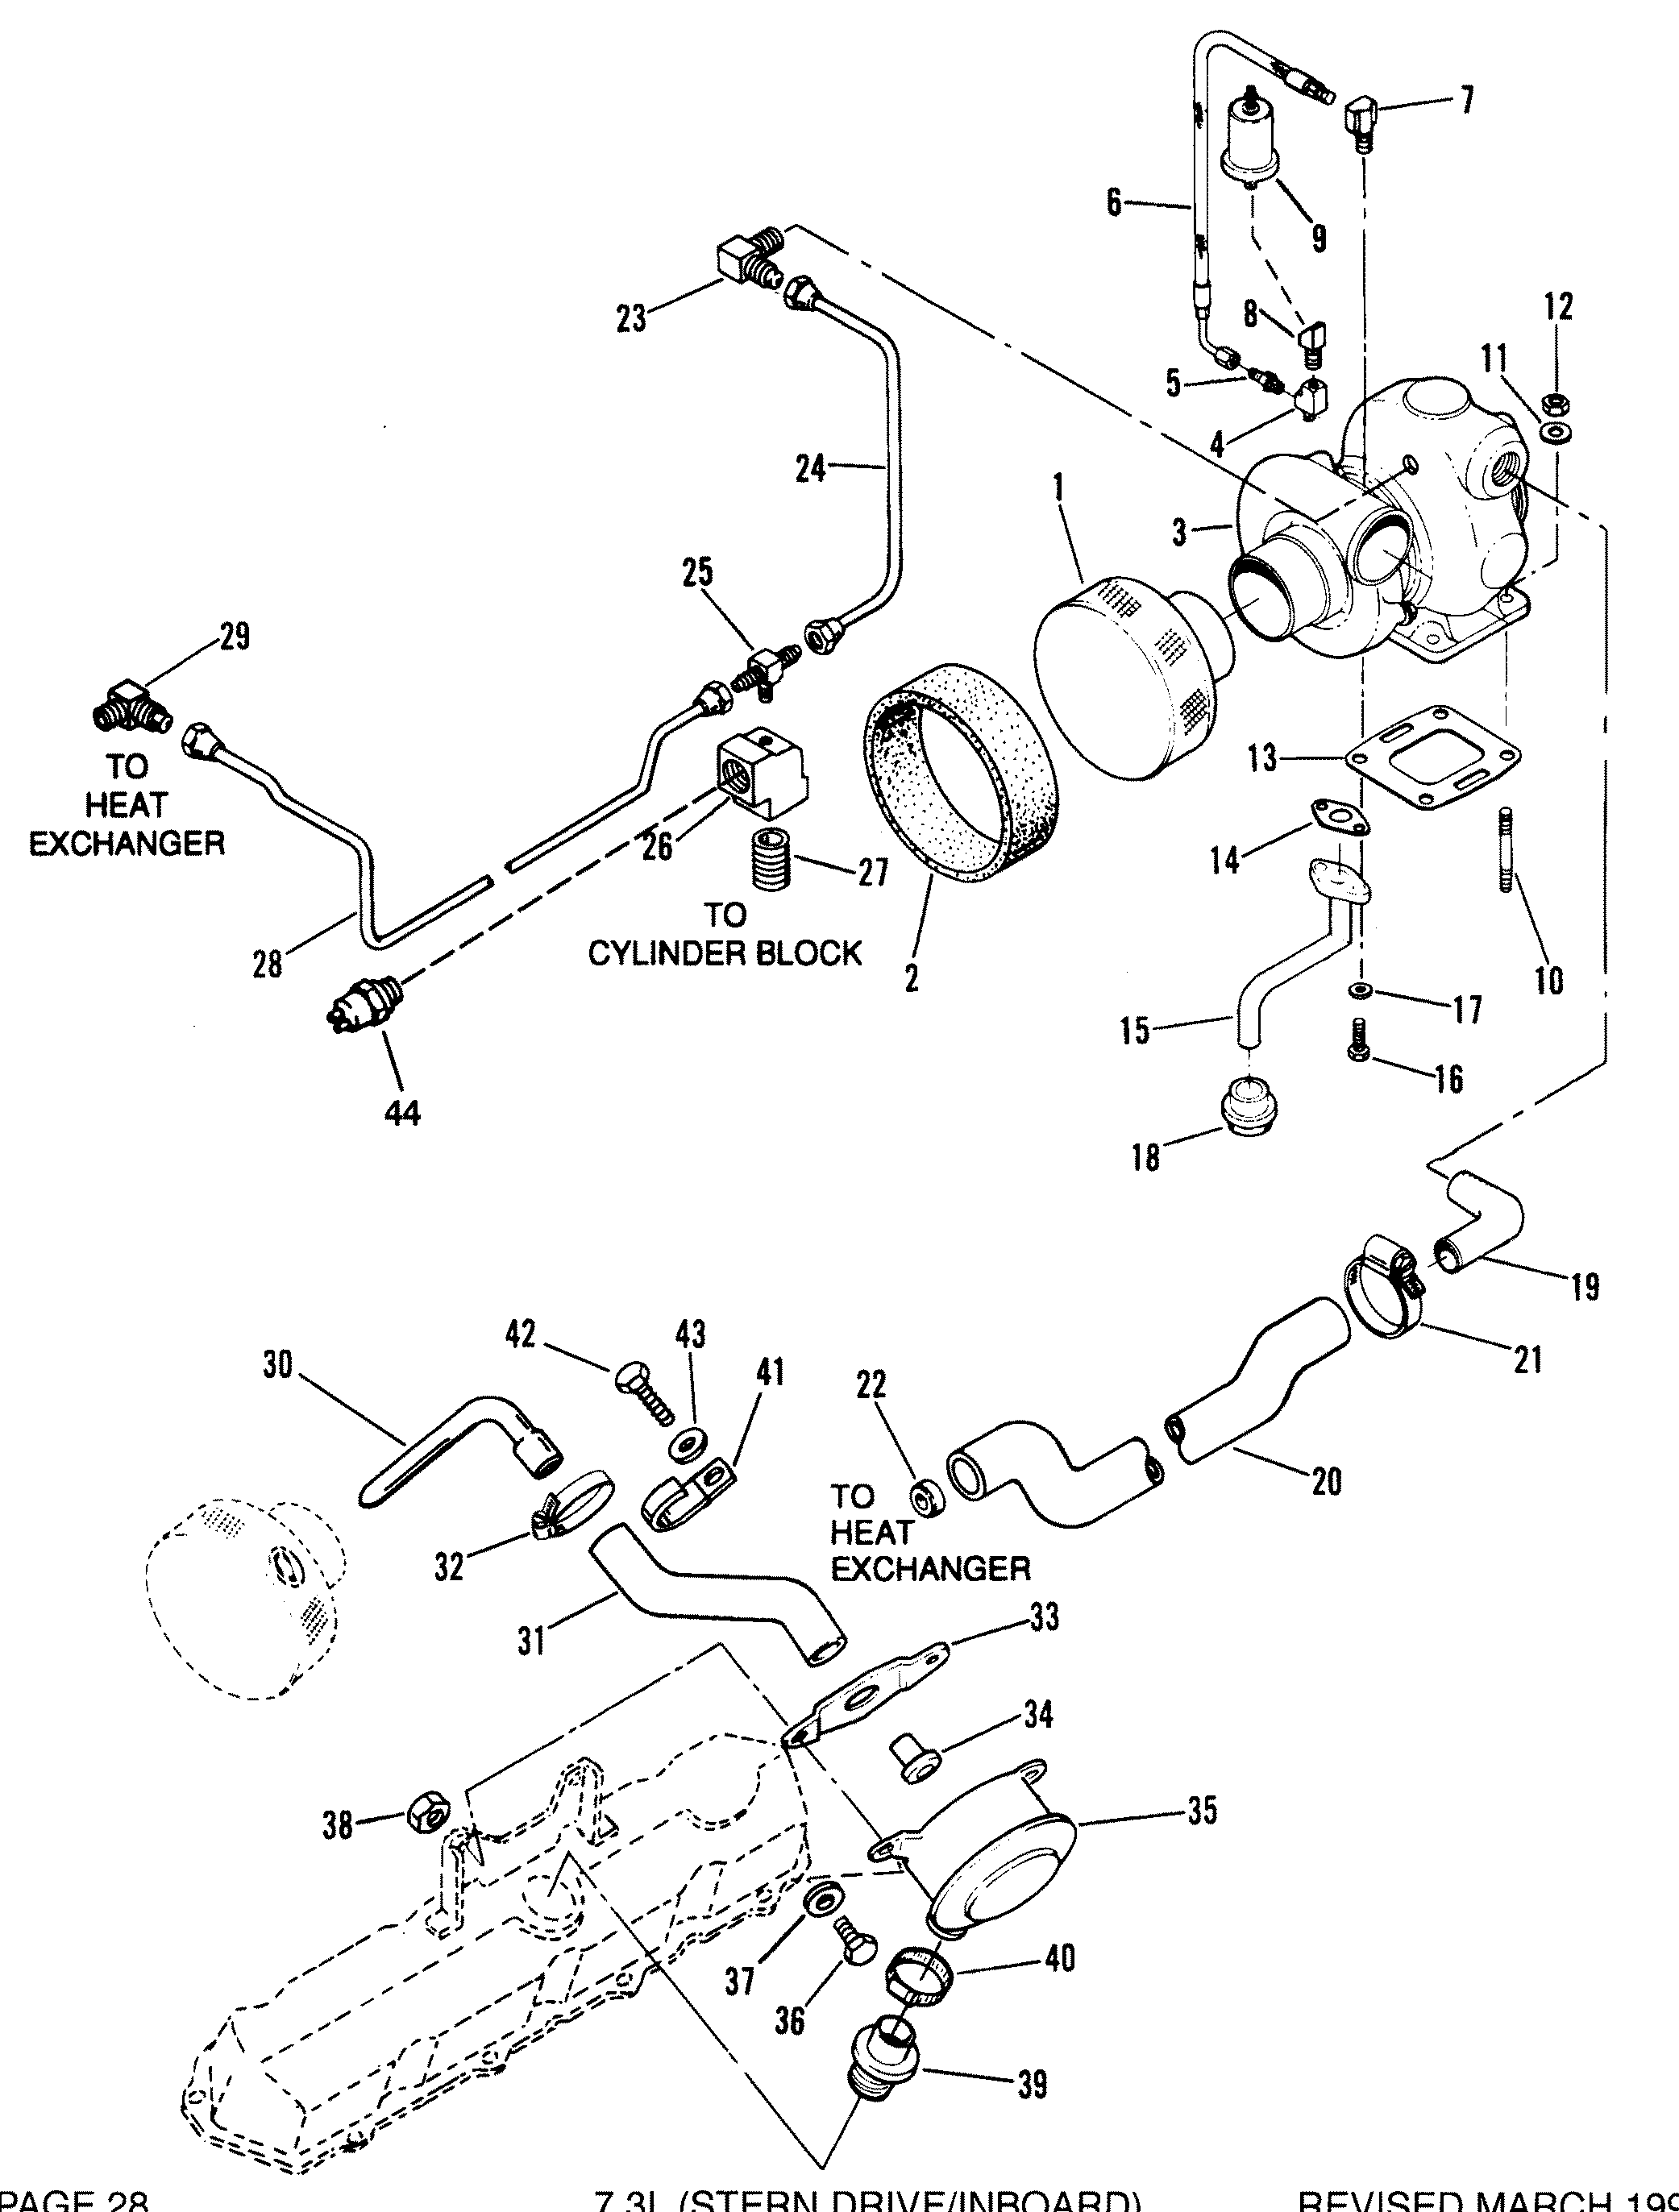 TURBOCHARGER AND AIR CLEANER